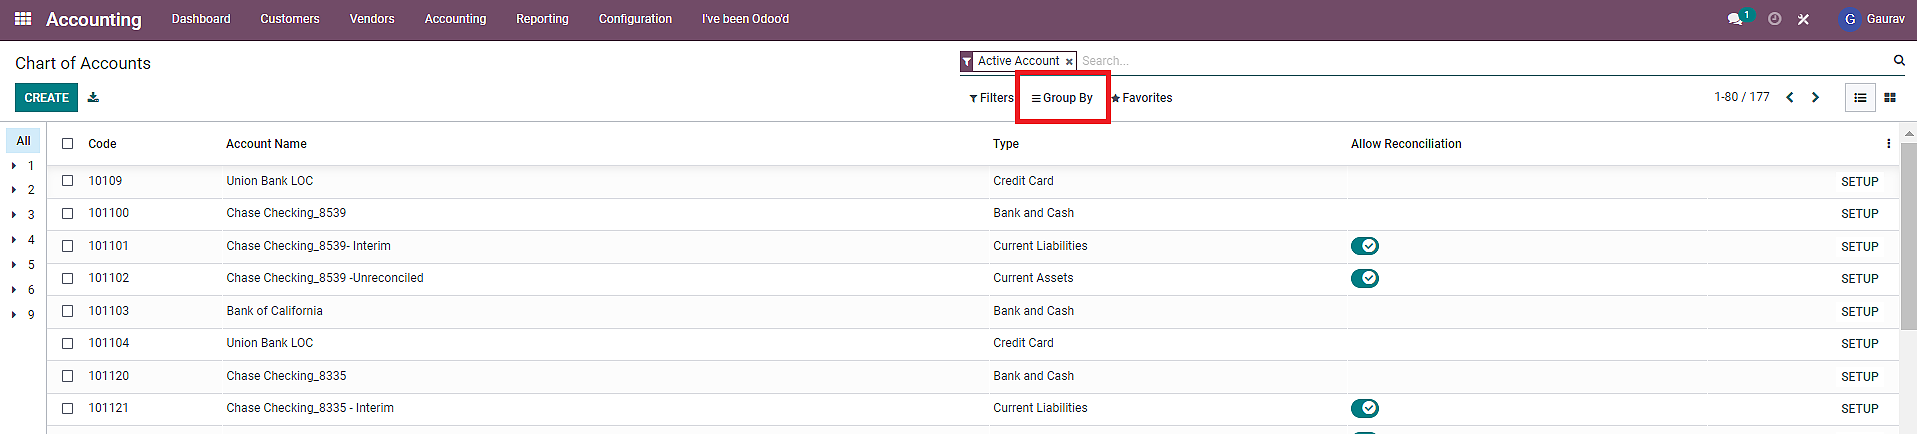 chart of accounts odoo you will see a “Group By” button. Click on it.